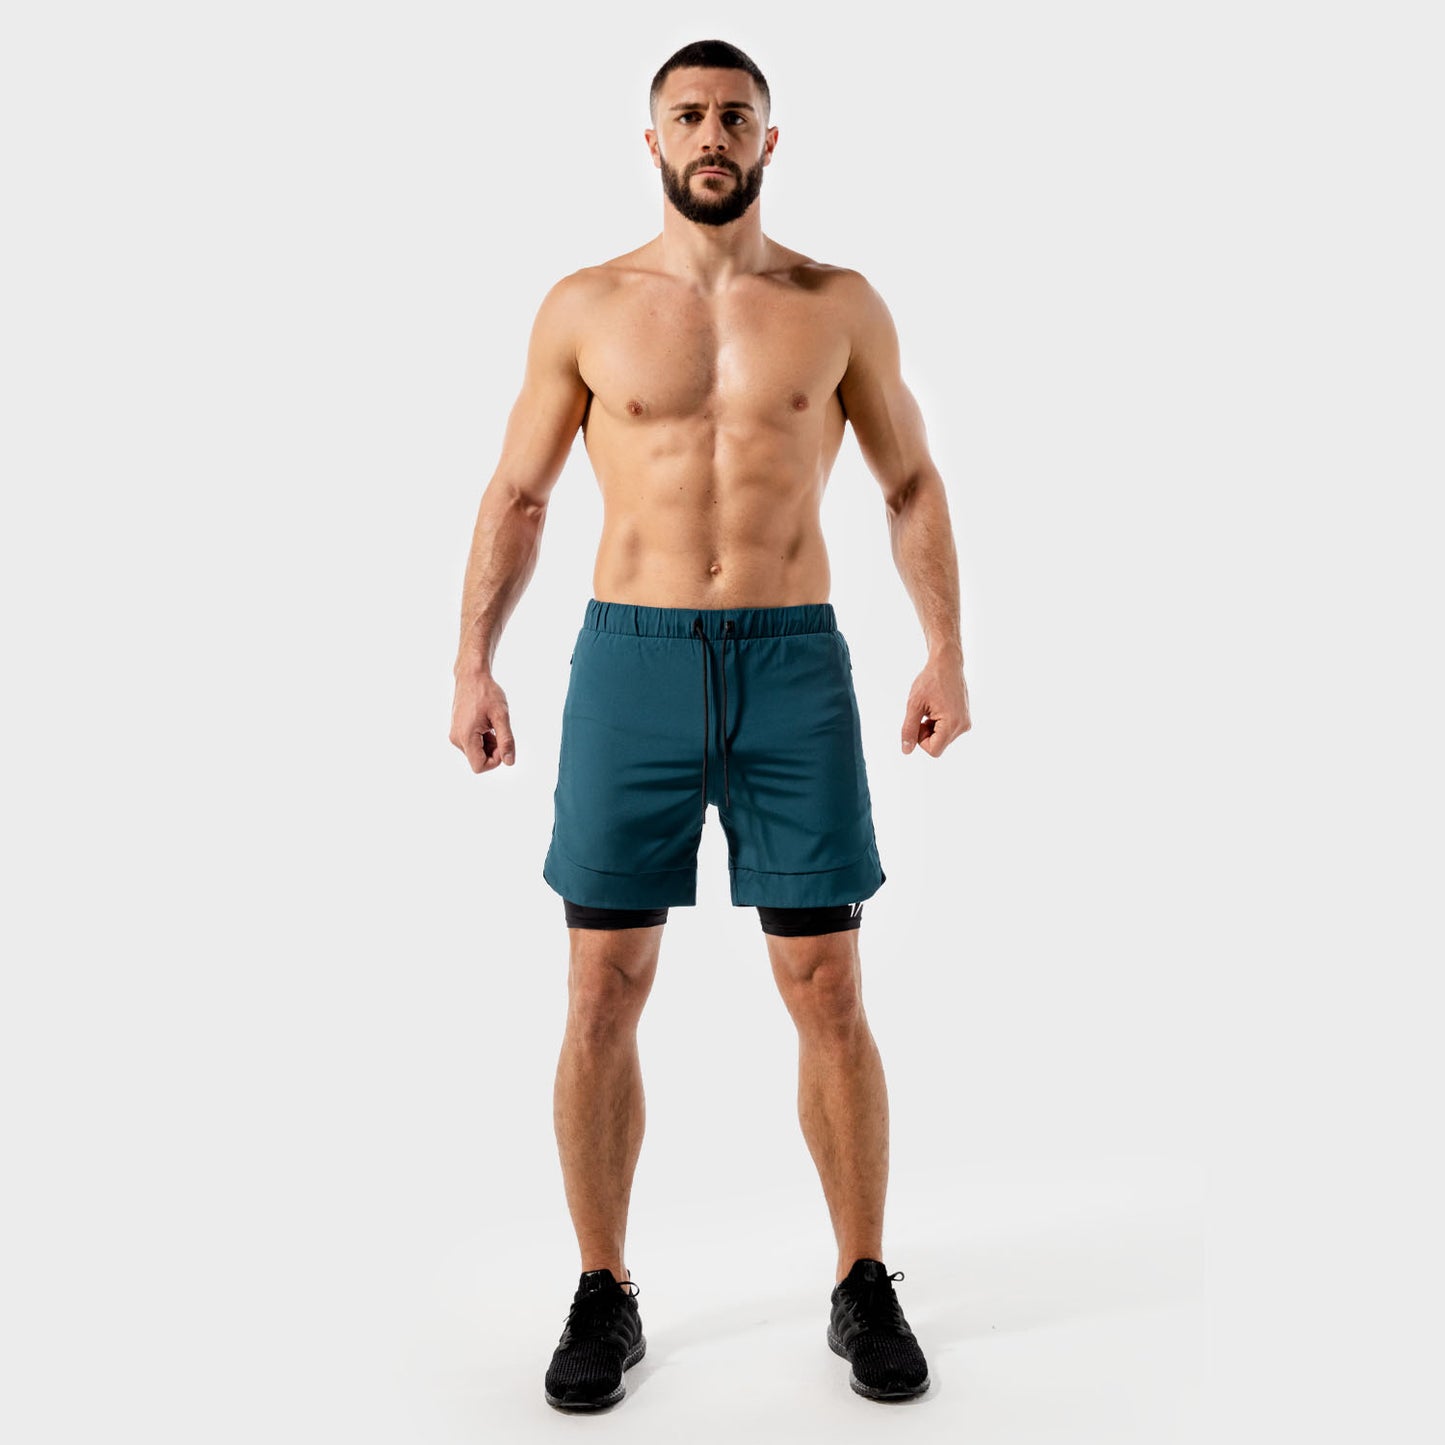 squatwolf-workout-short-for-men-limitless-2-in-1-shorts-teal-gym-wear